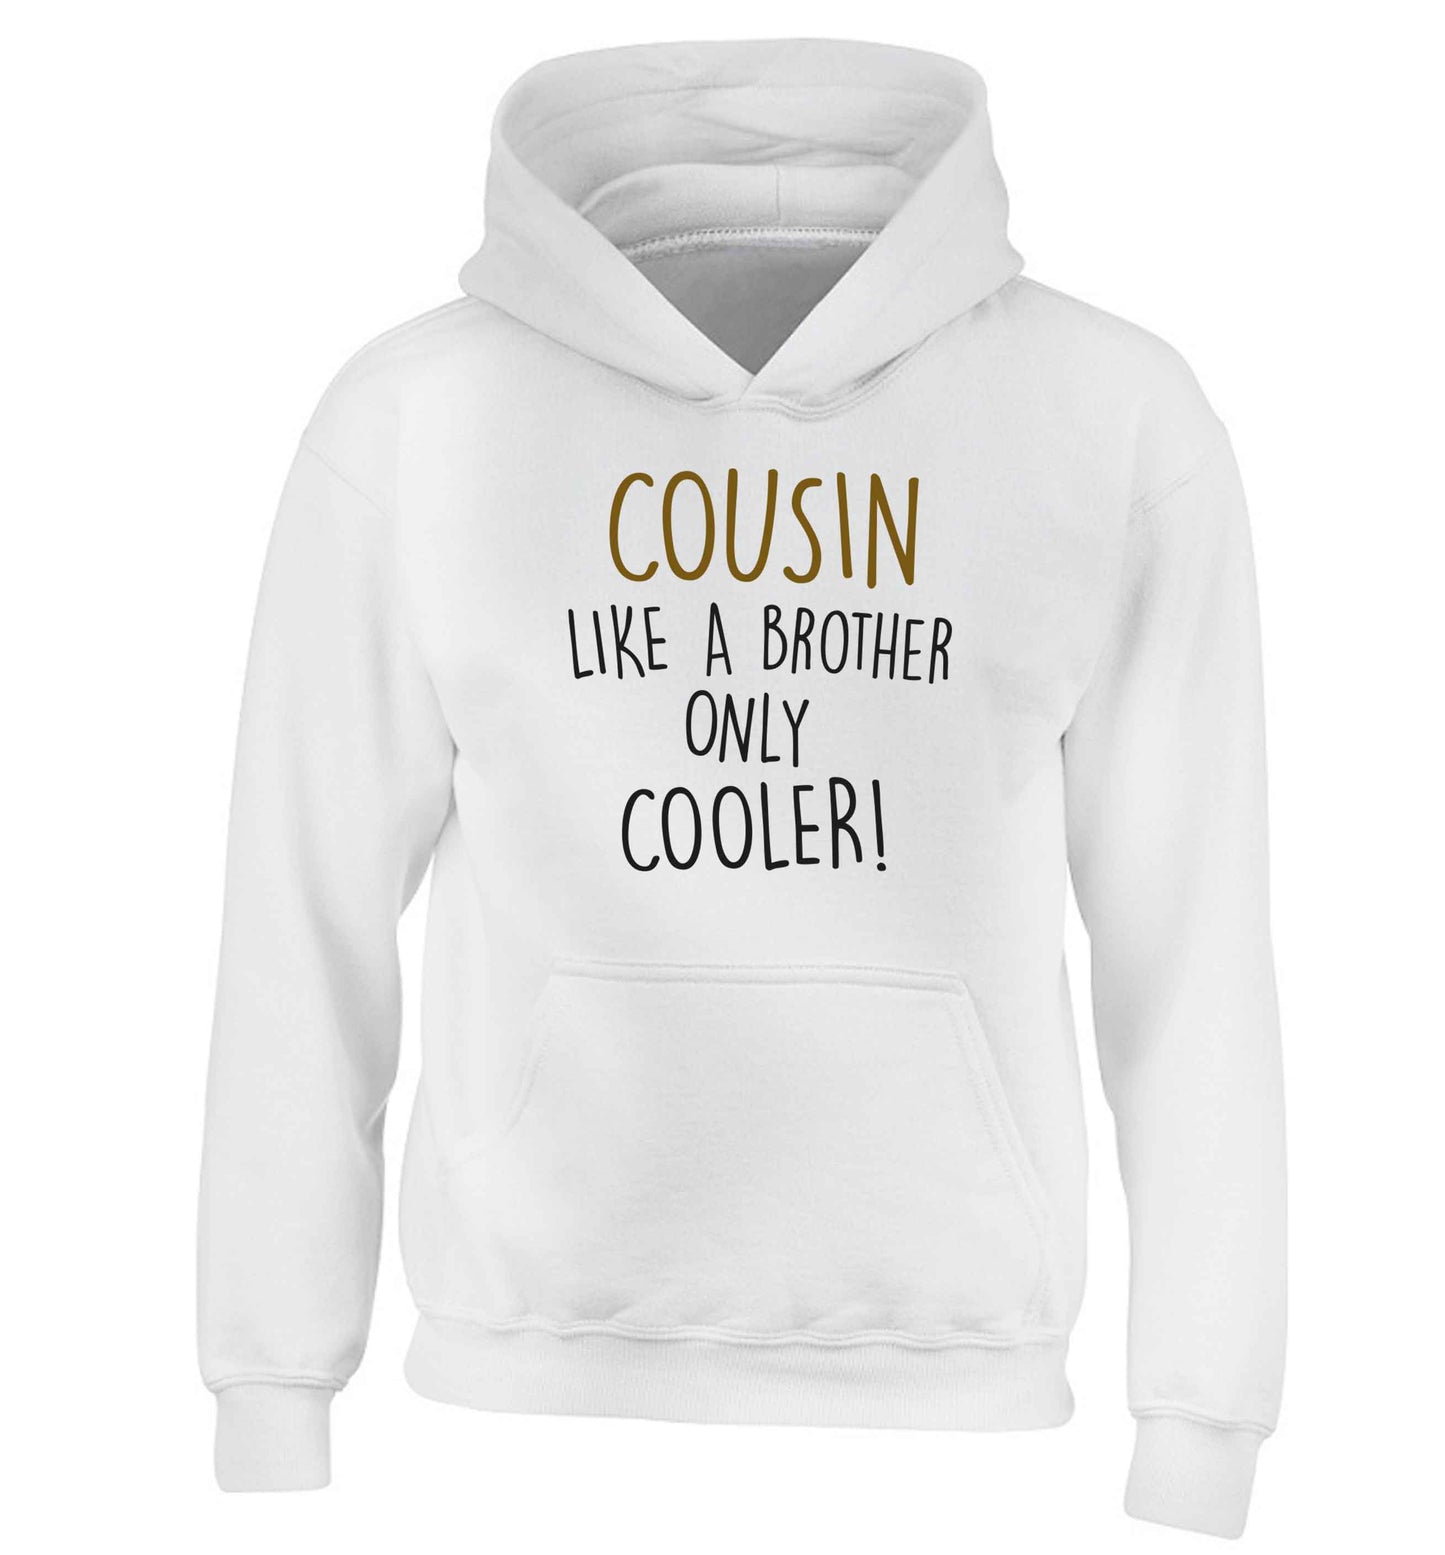 Cousin like a brother only cooler children's white hoodie 12-13 Years